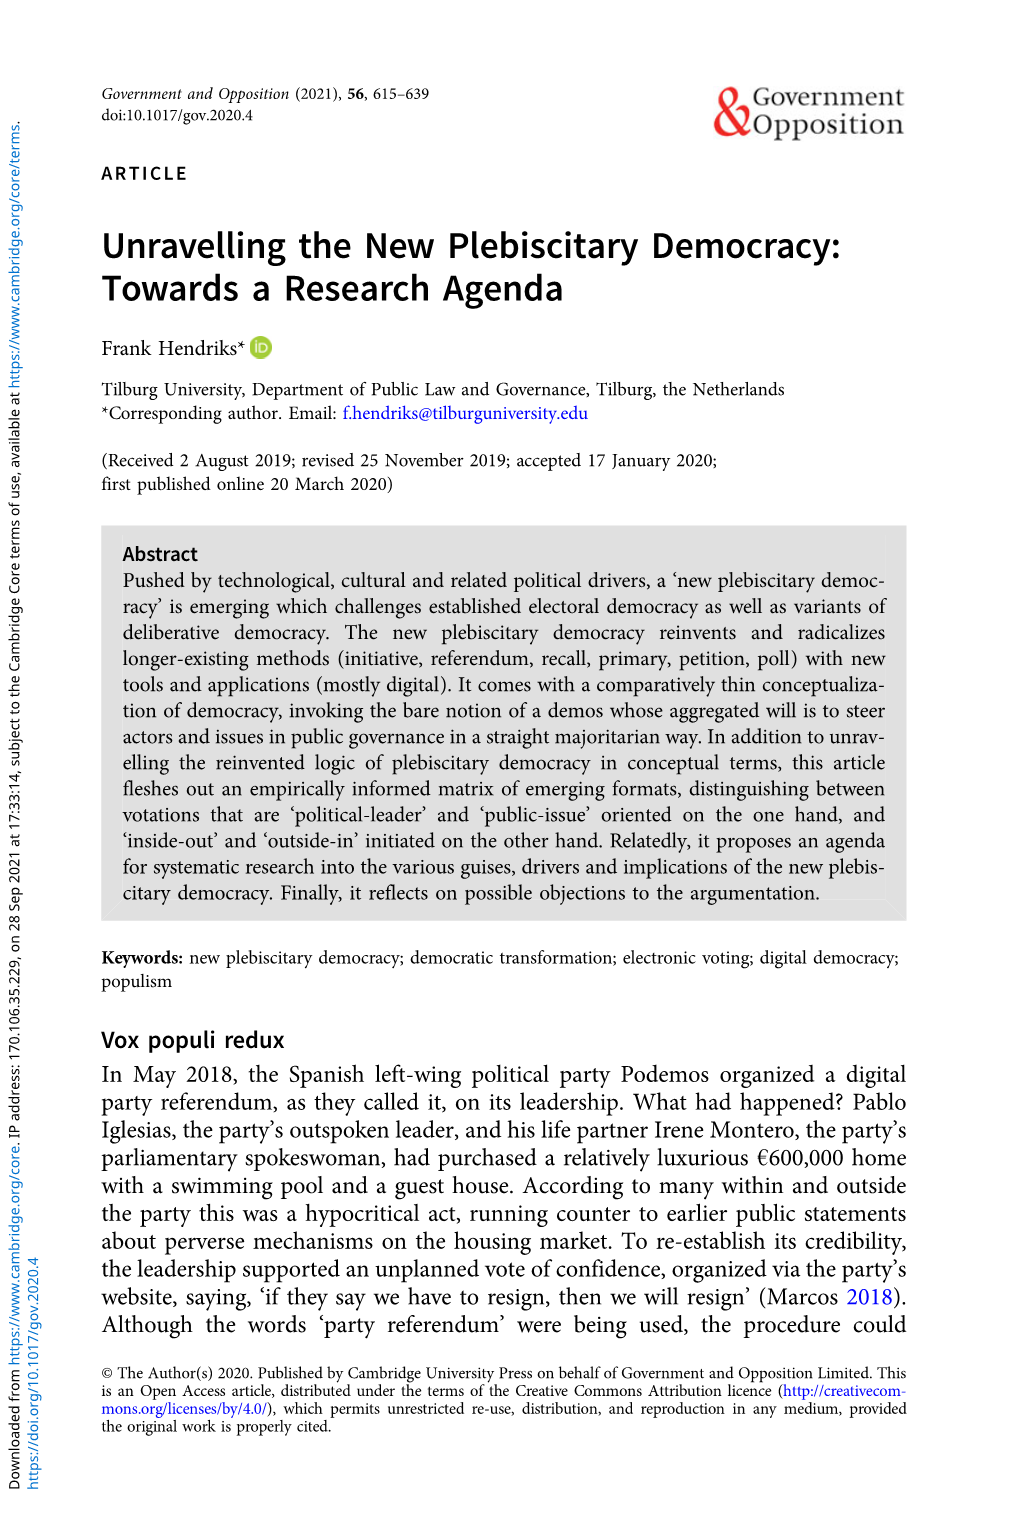 Unravelling the New Plebiscitary Democracy: Towards a Research Agenda